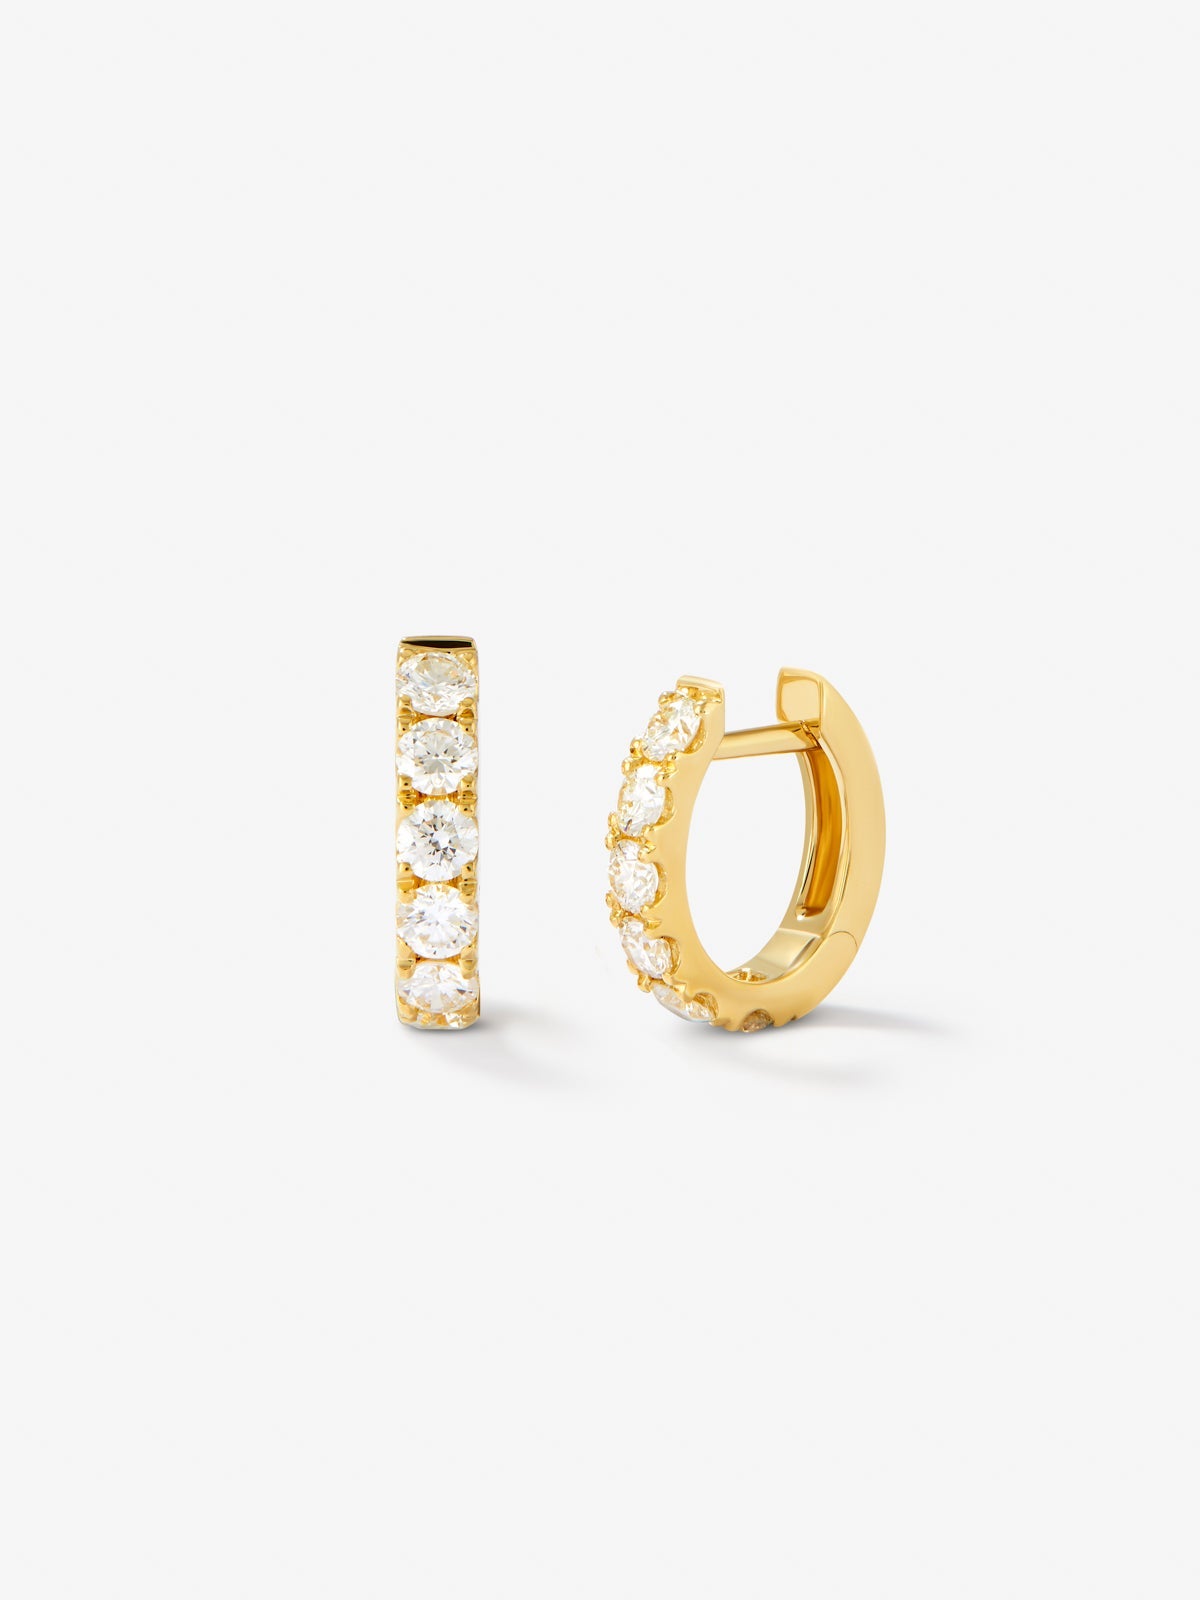 18K yellow gold hoop earrings with 12 brilliant-cut diamonds with a total of 0.65 cts